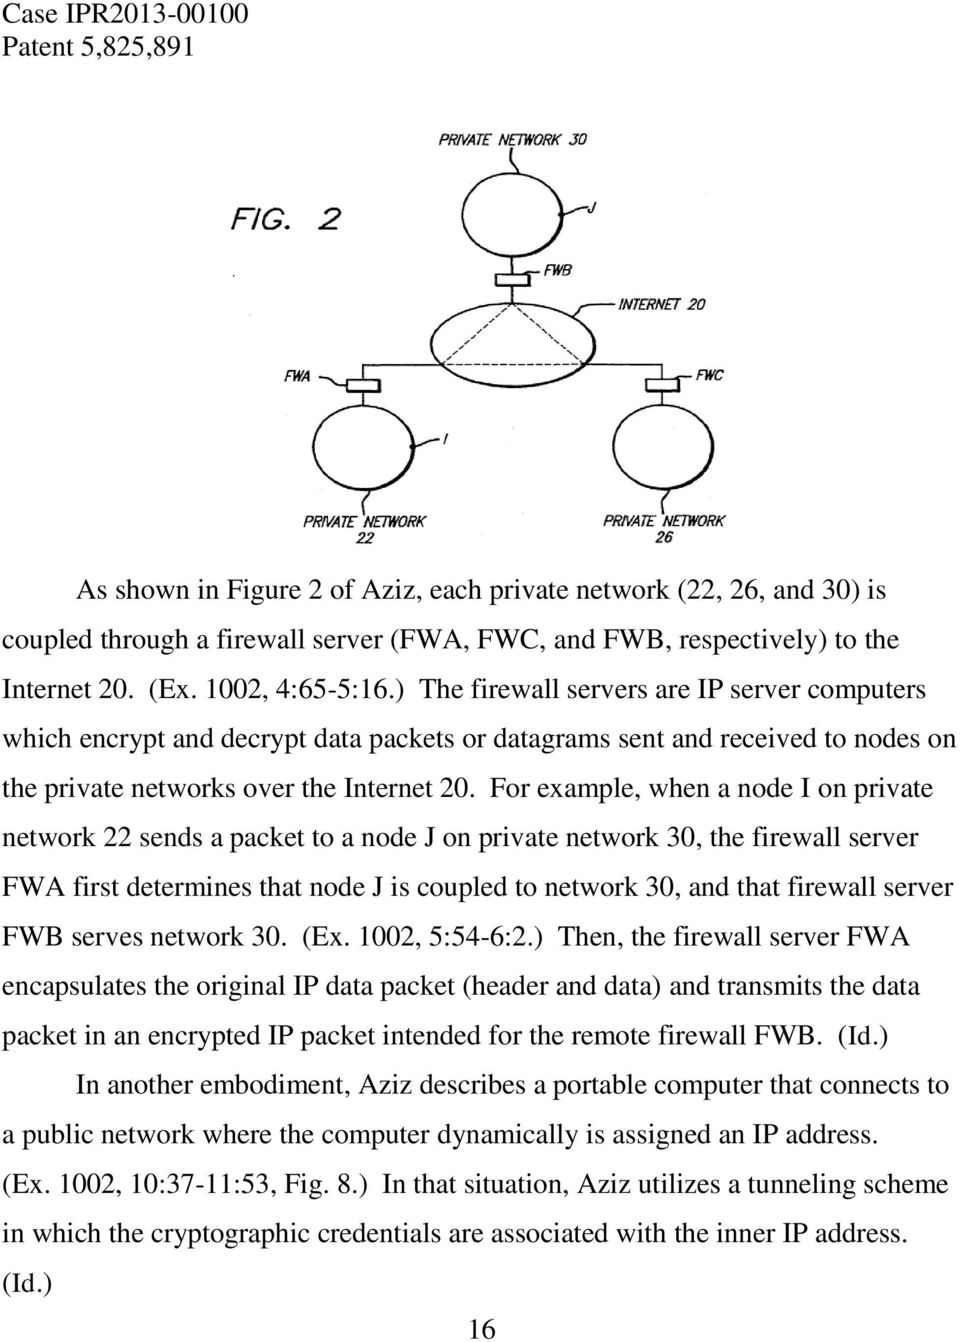 For example, when a node I on private network 22 sends a packet to a node J on private network 30, the firewall server FWA first determines that node J is coupled to network 30, and that firewall